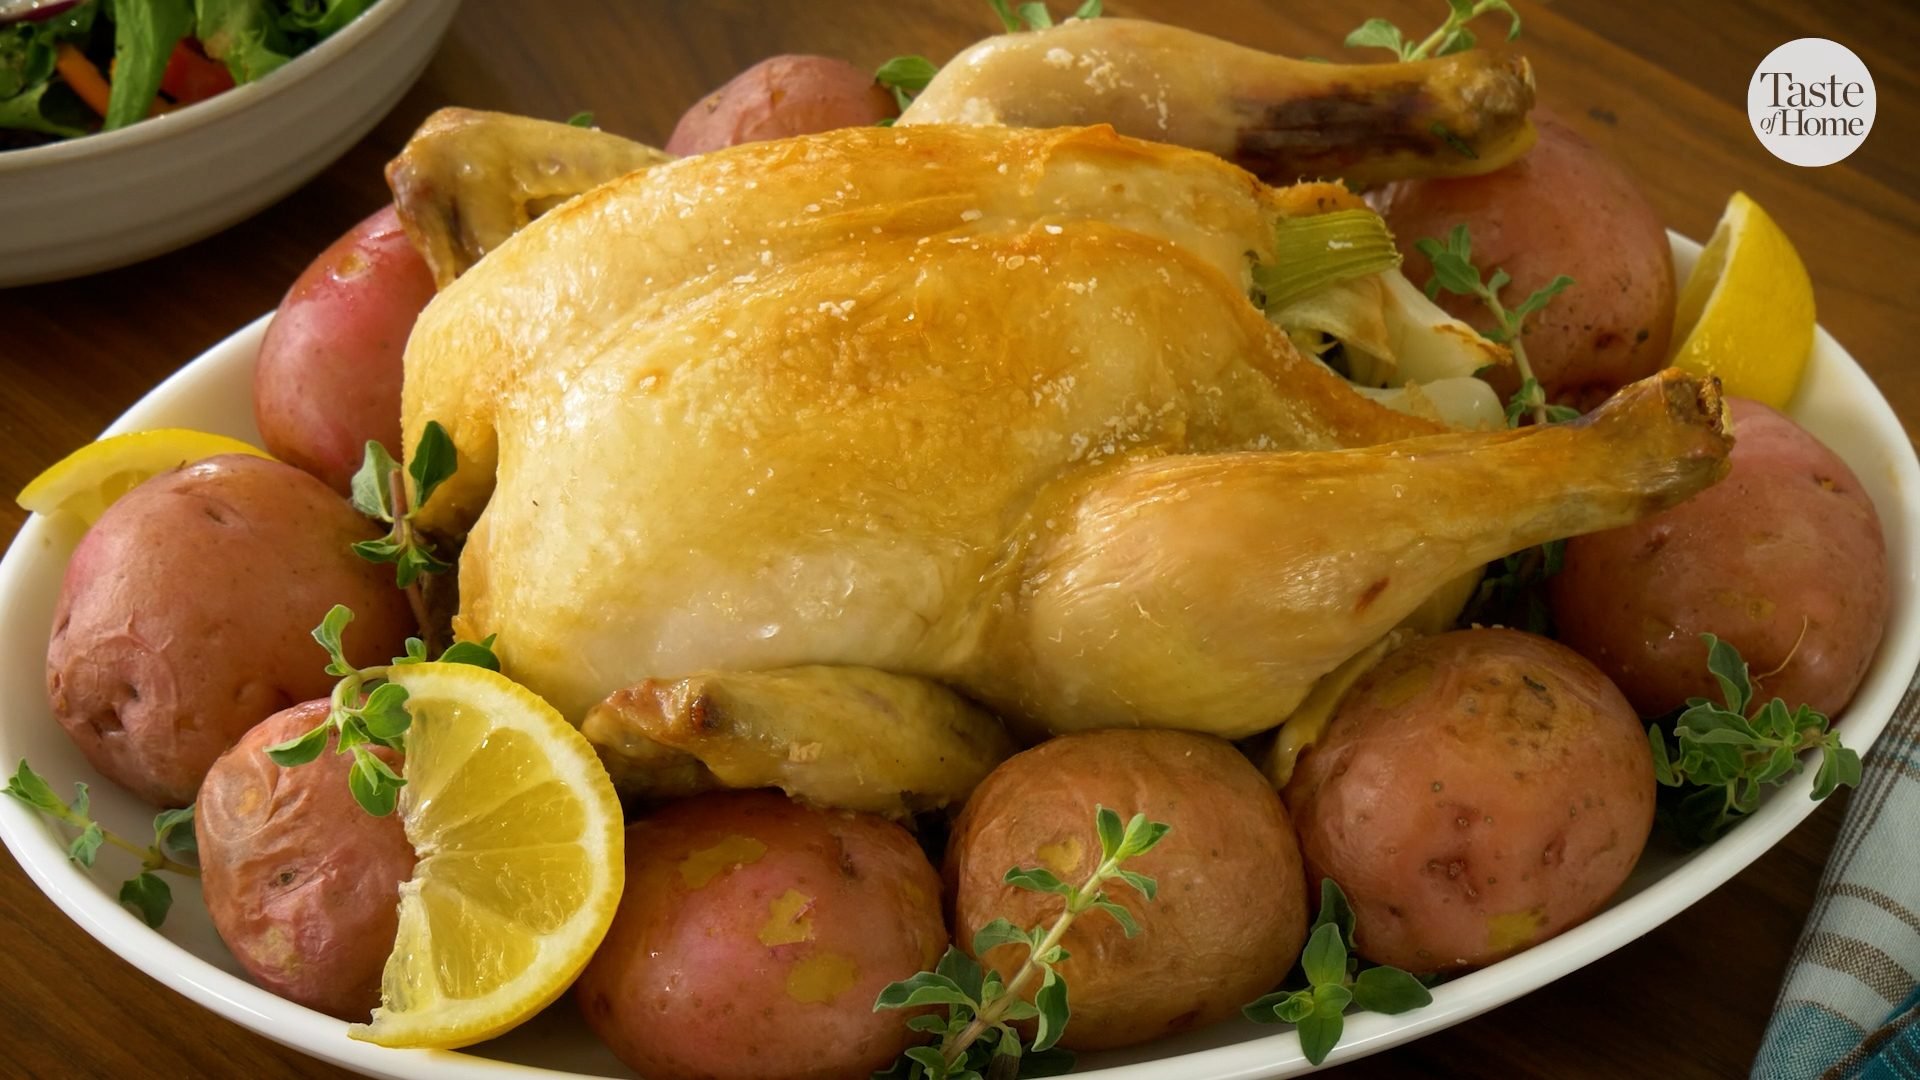 Best Dutch Oven Whole Chicken · The Typical Mom